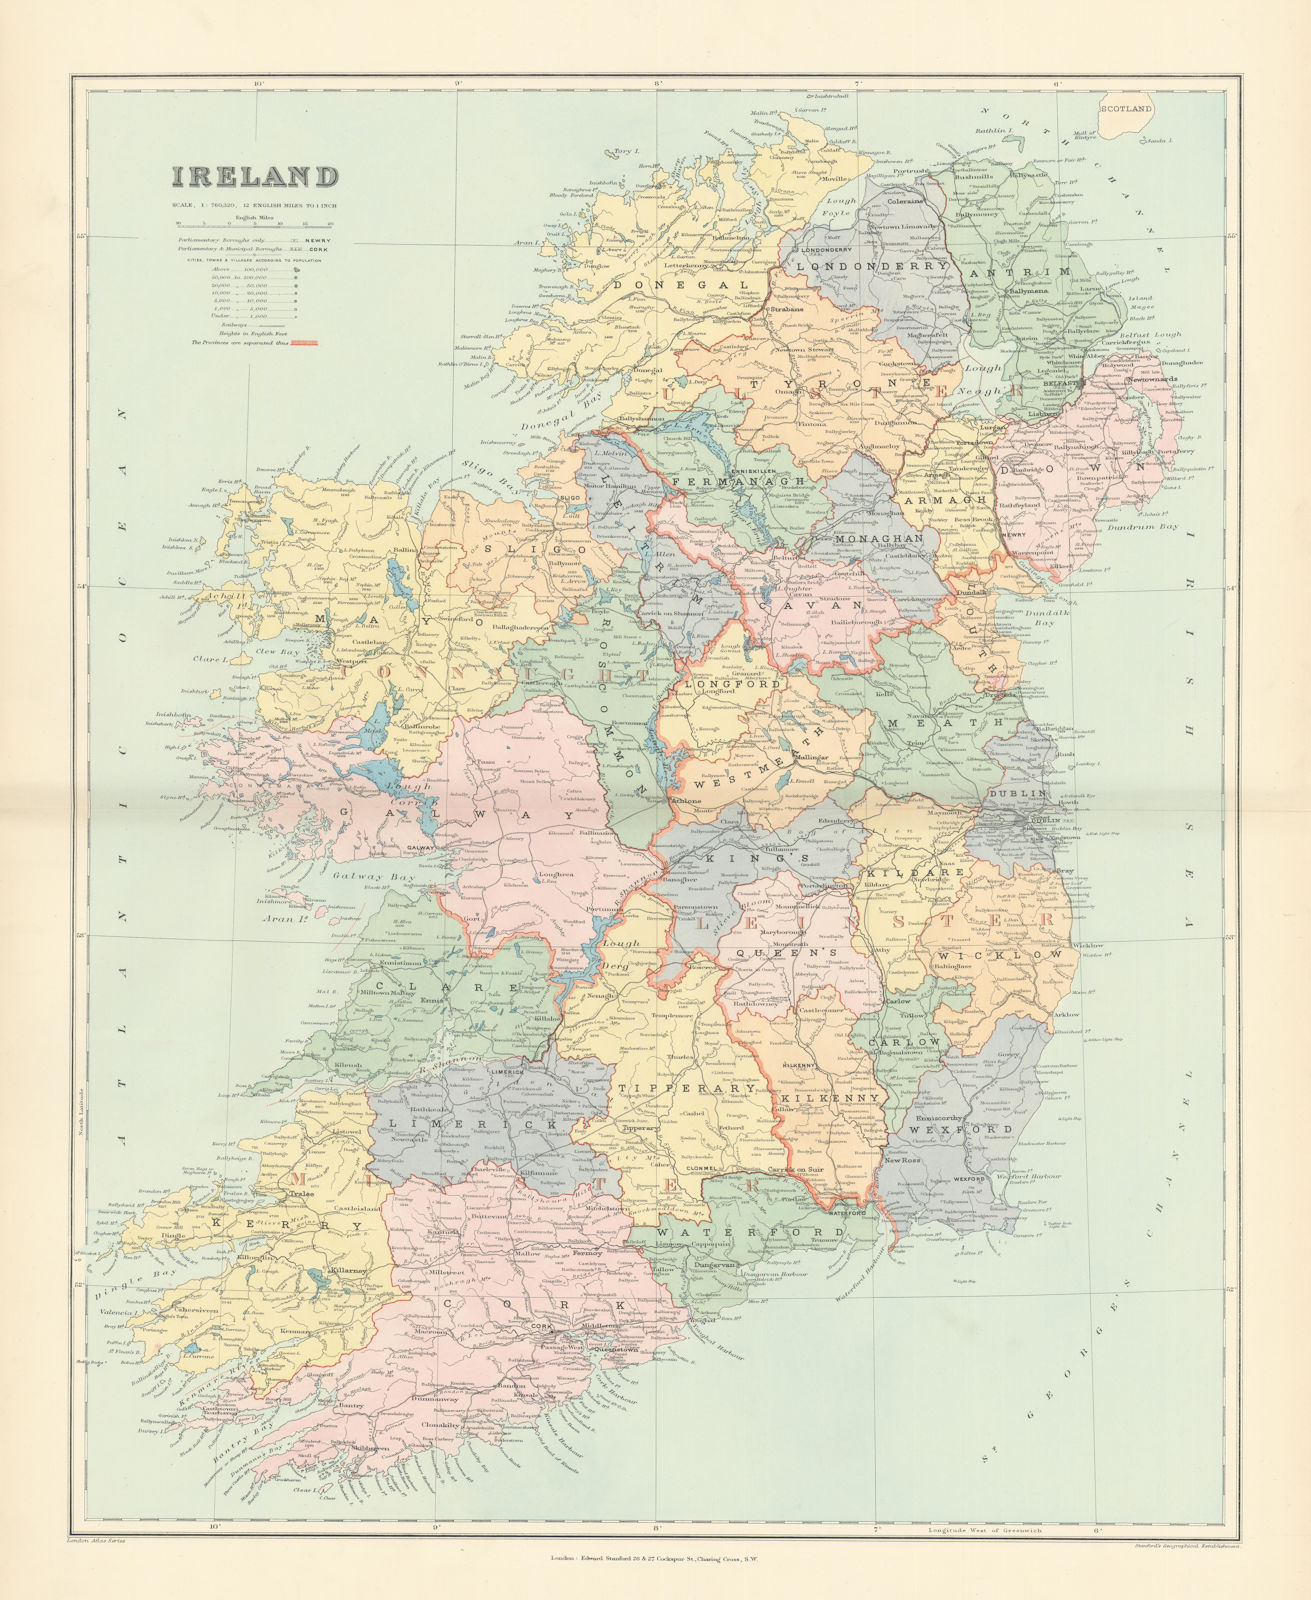 Associate Product Ireland. Counties, railways & provinces. Large 64x52cm. STANFORD 1896 old map